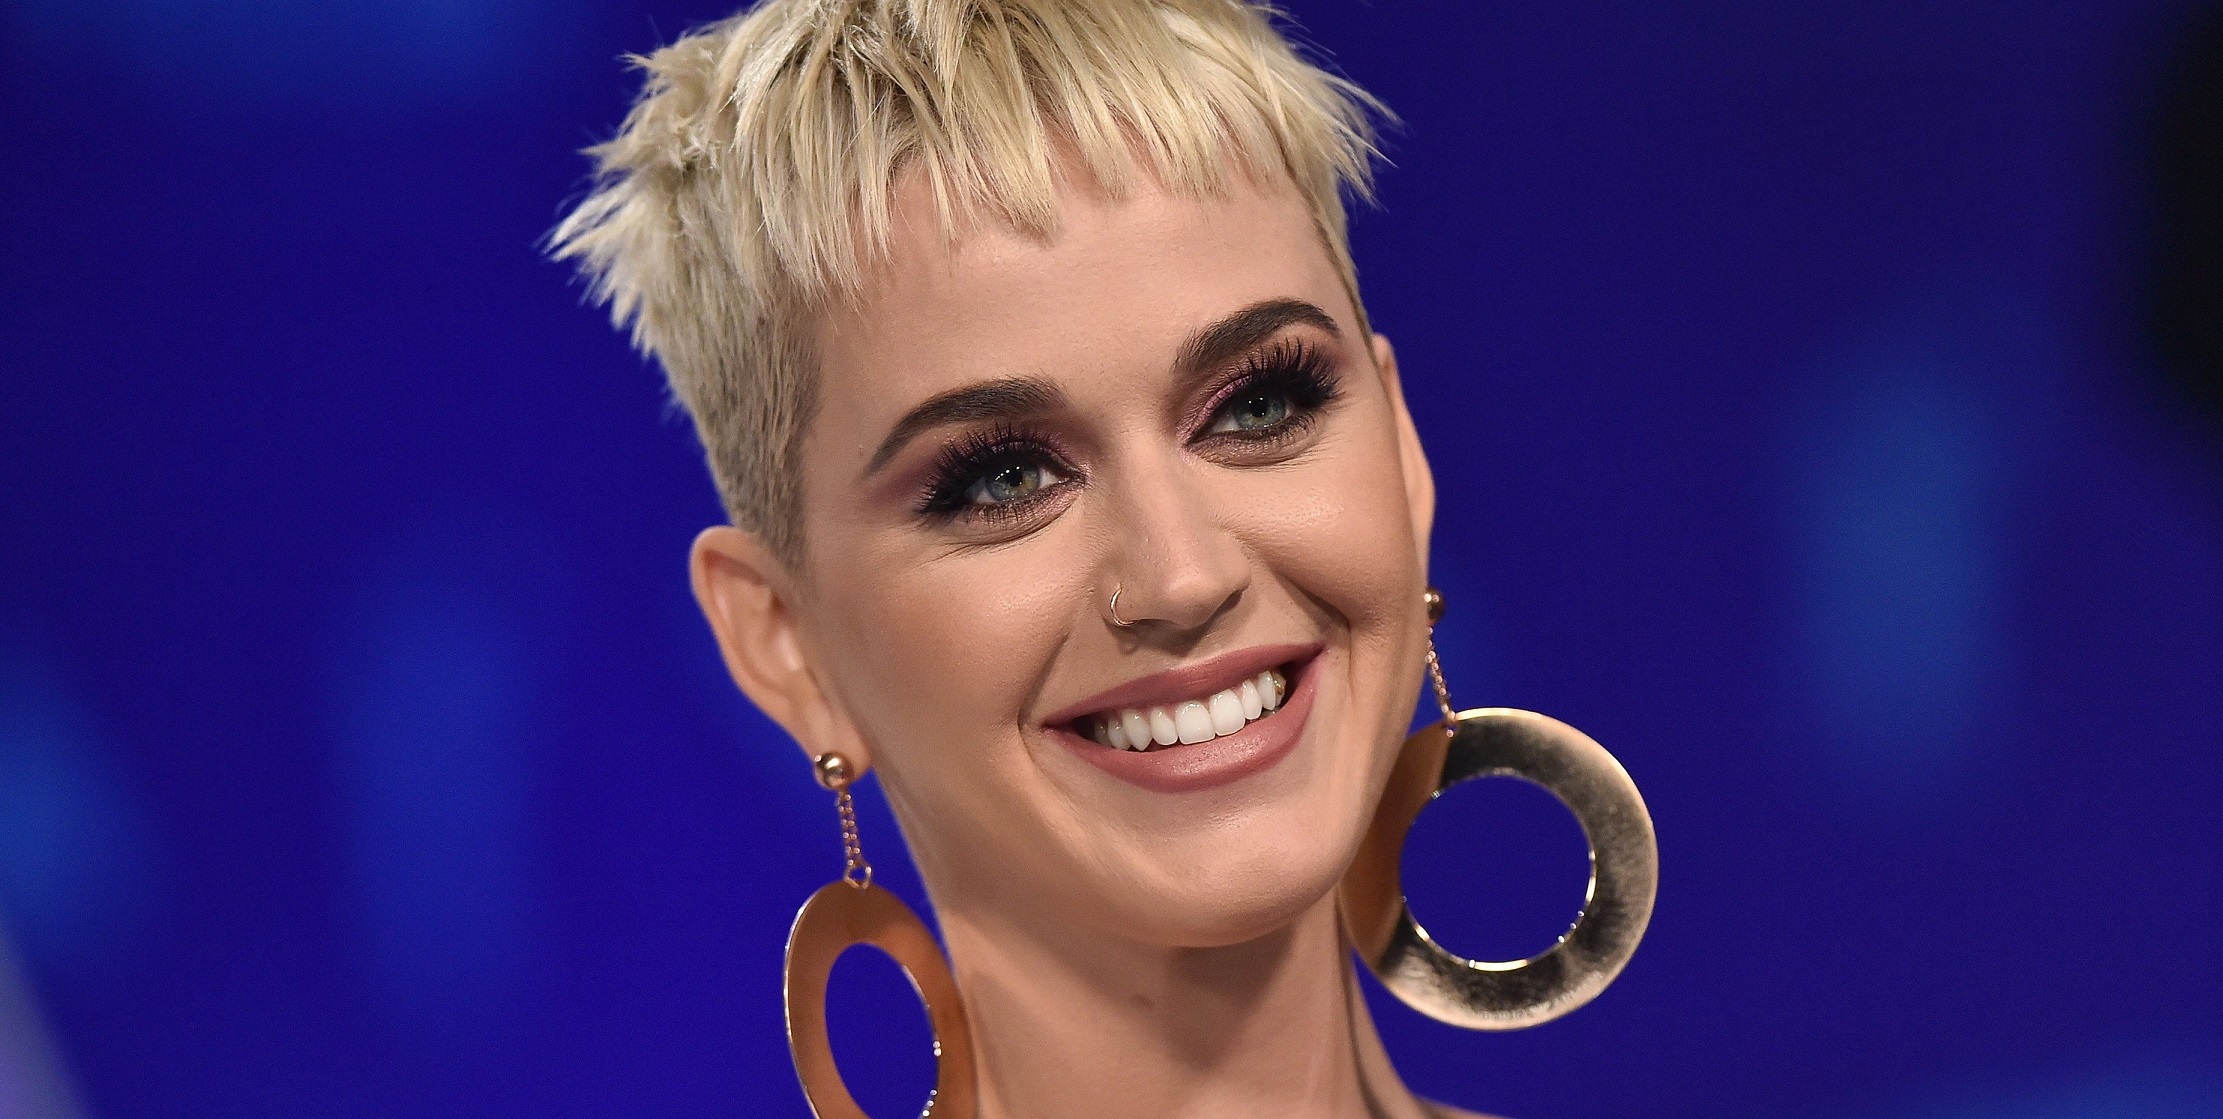 Katy Perry Talks About Dealing With ‘Depression’ After Last Album Failure!